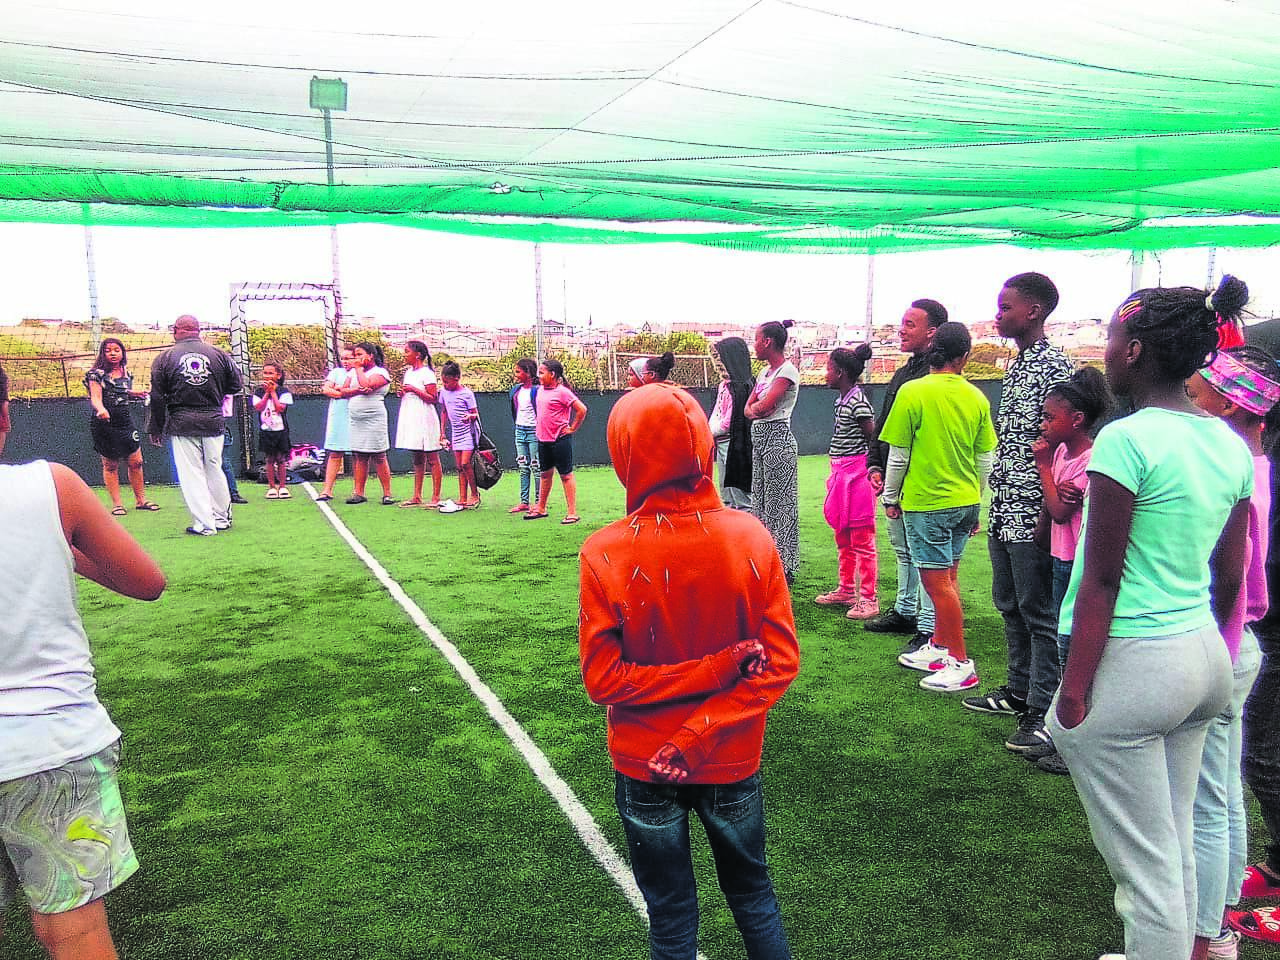 A group of 100 at-risk youth were taught self-defense as part of the intervention programme and fun day.